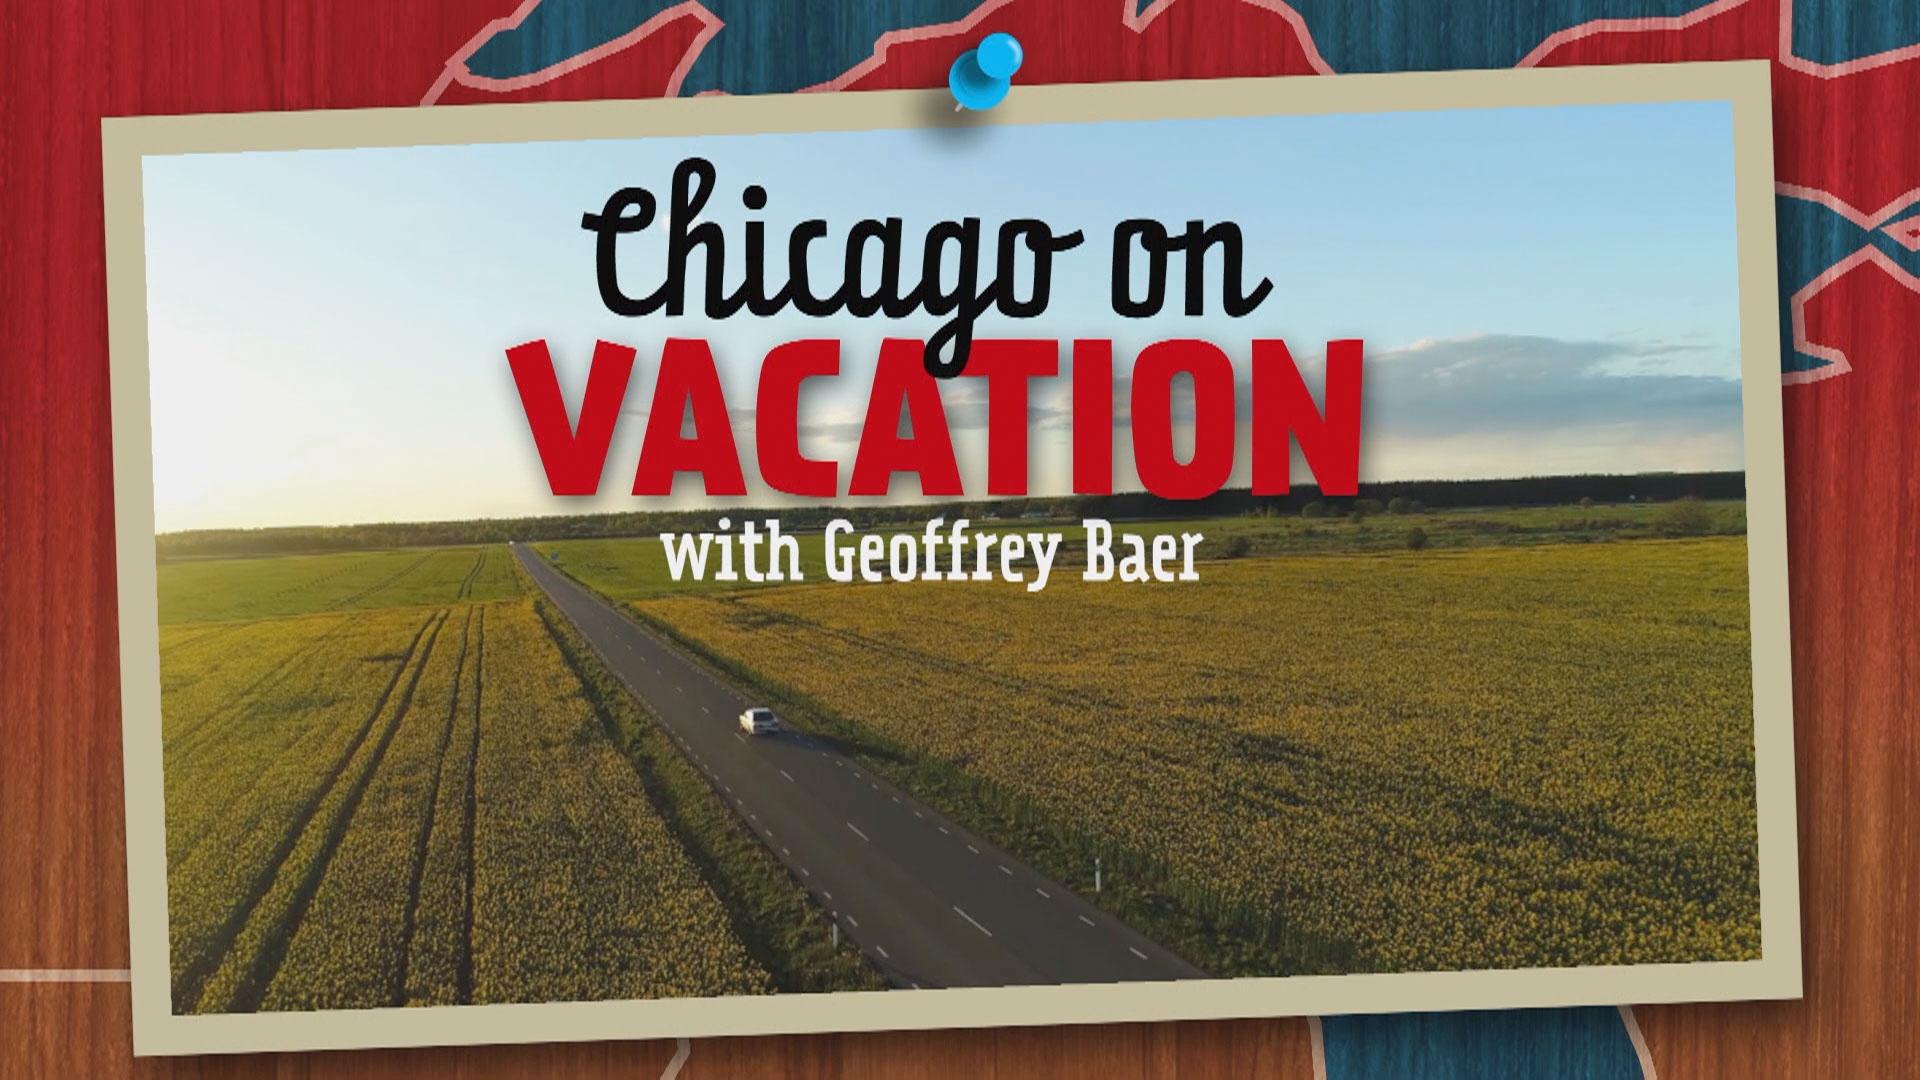 Chicago On Vacation title screen